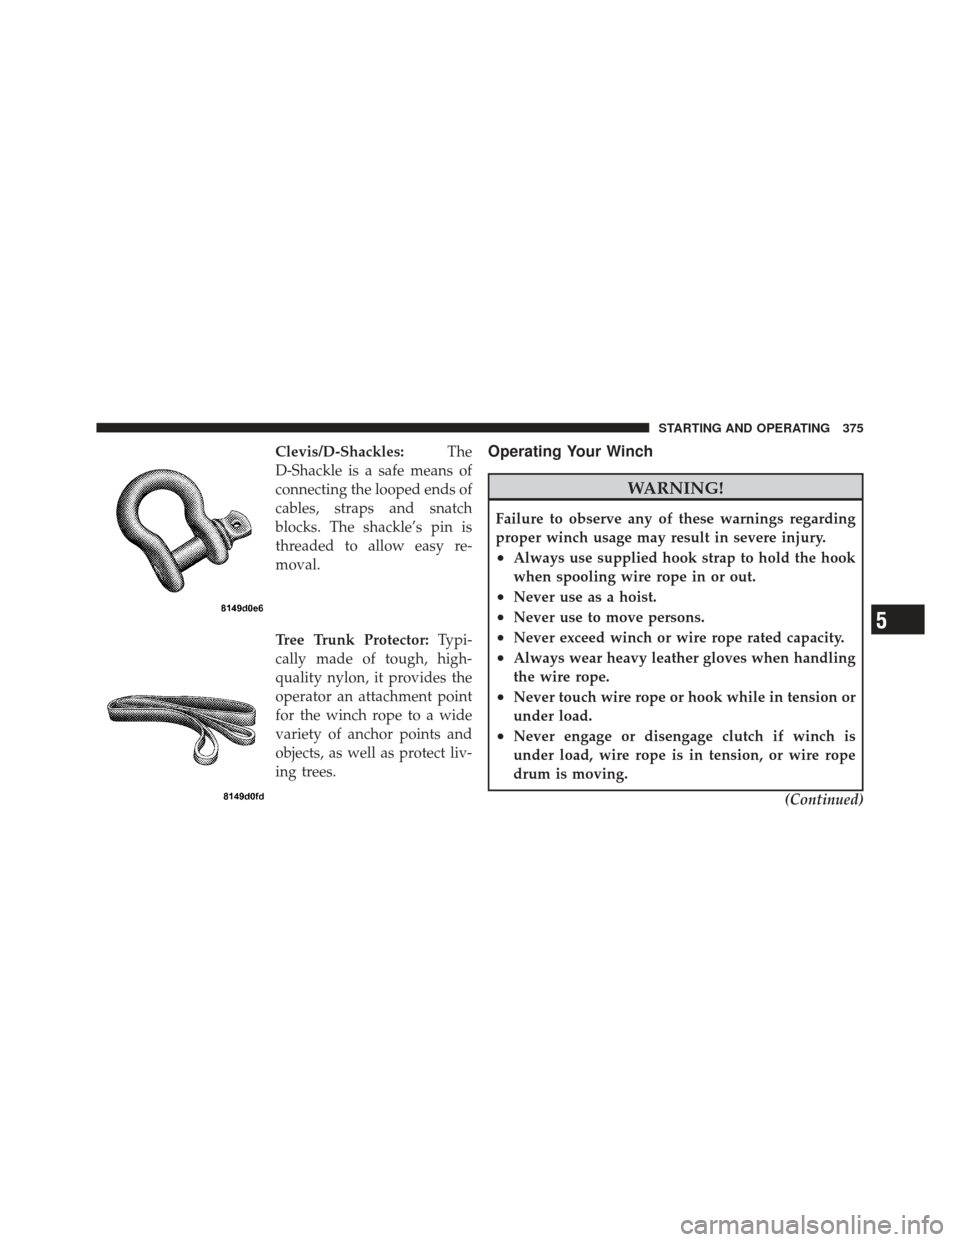 Ram 1500 2011  Owners Manual Clevis/D-Shackles:The
D-Shackle is a safe means of
connecting the looped ends of
cables, straps and snatch
blocks. The shackle’s pin is
threaded to allow easy re-
moval.
Tree Trunk Protector: Typi-
